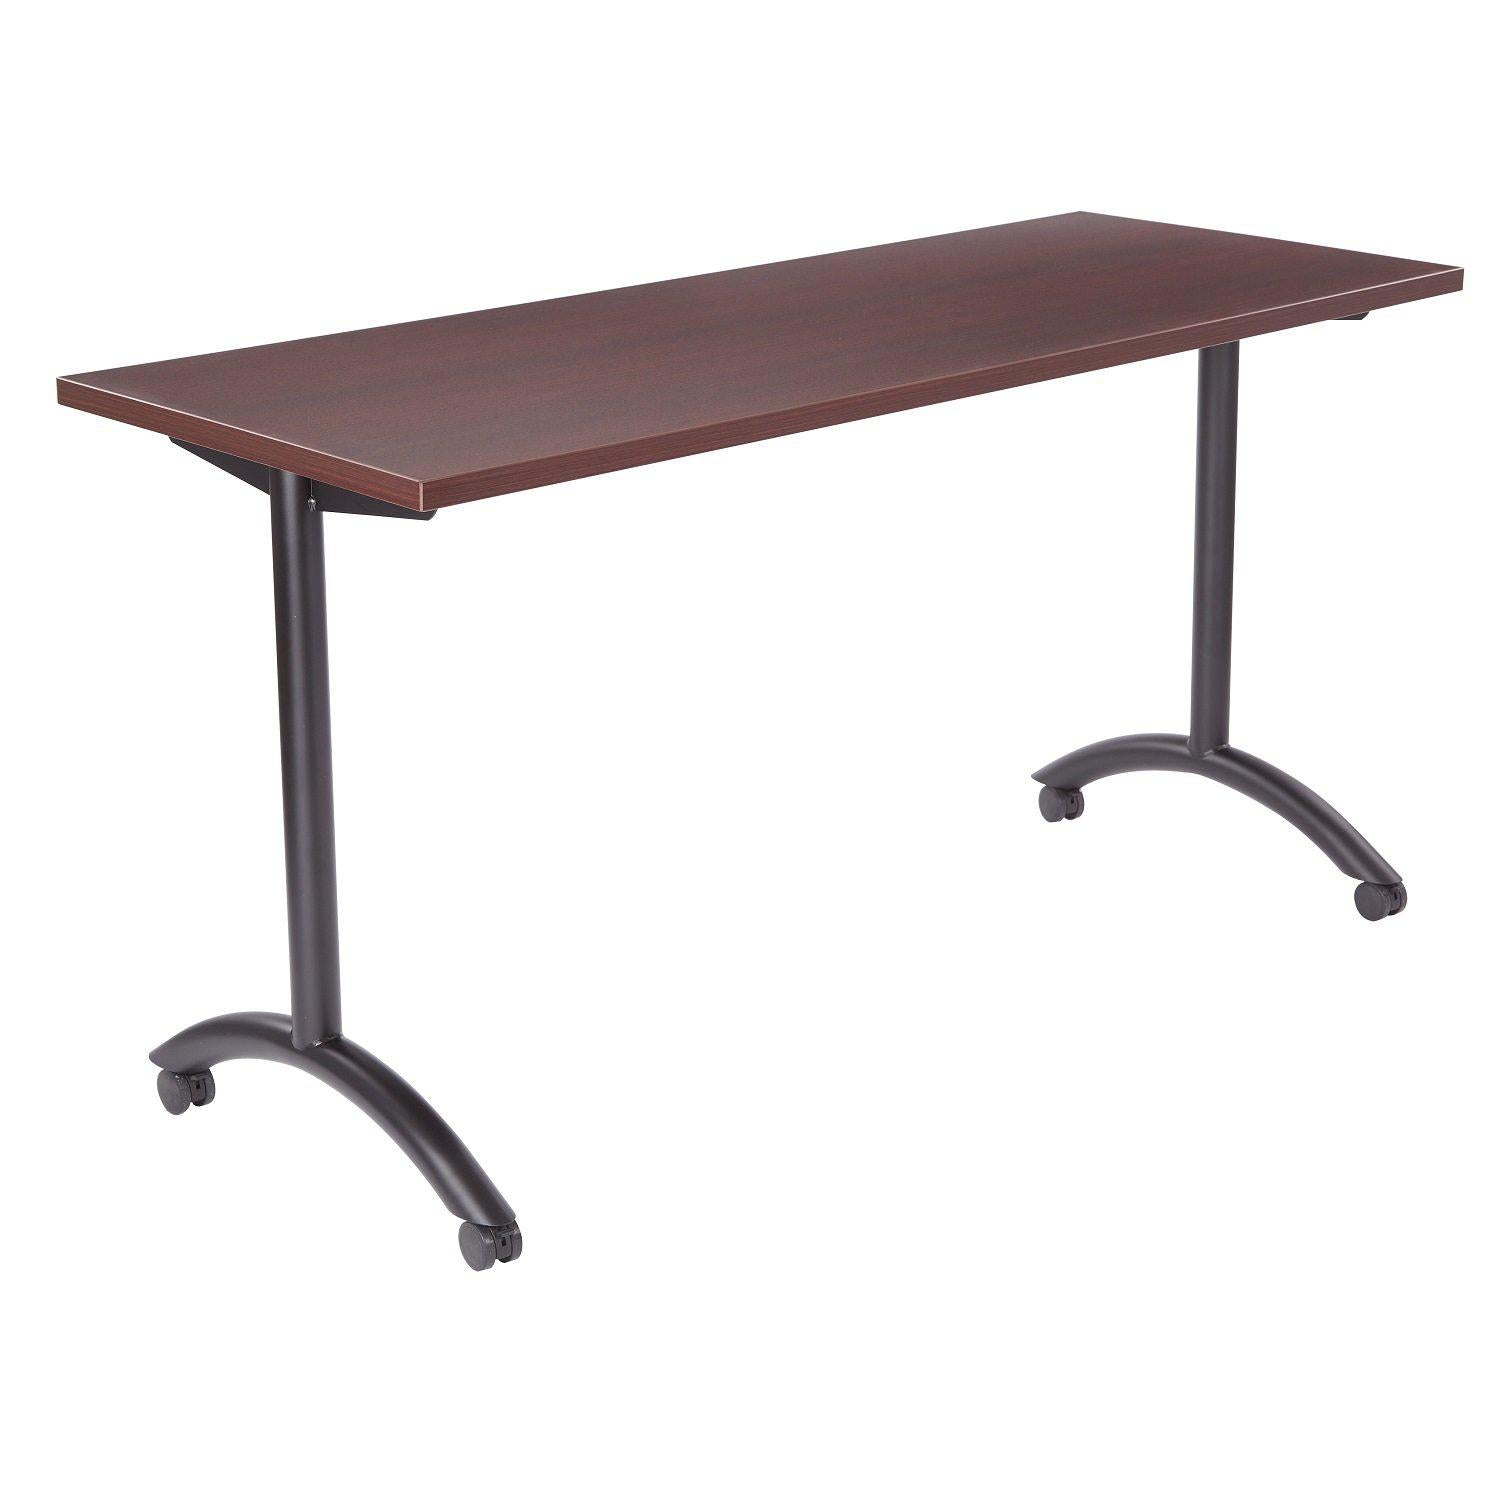 Pace Table with T-Arc Legs, 60" x 24"